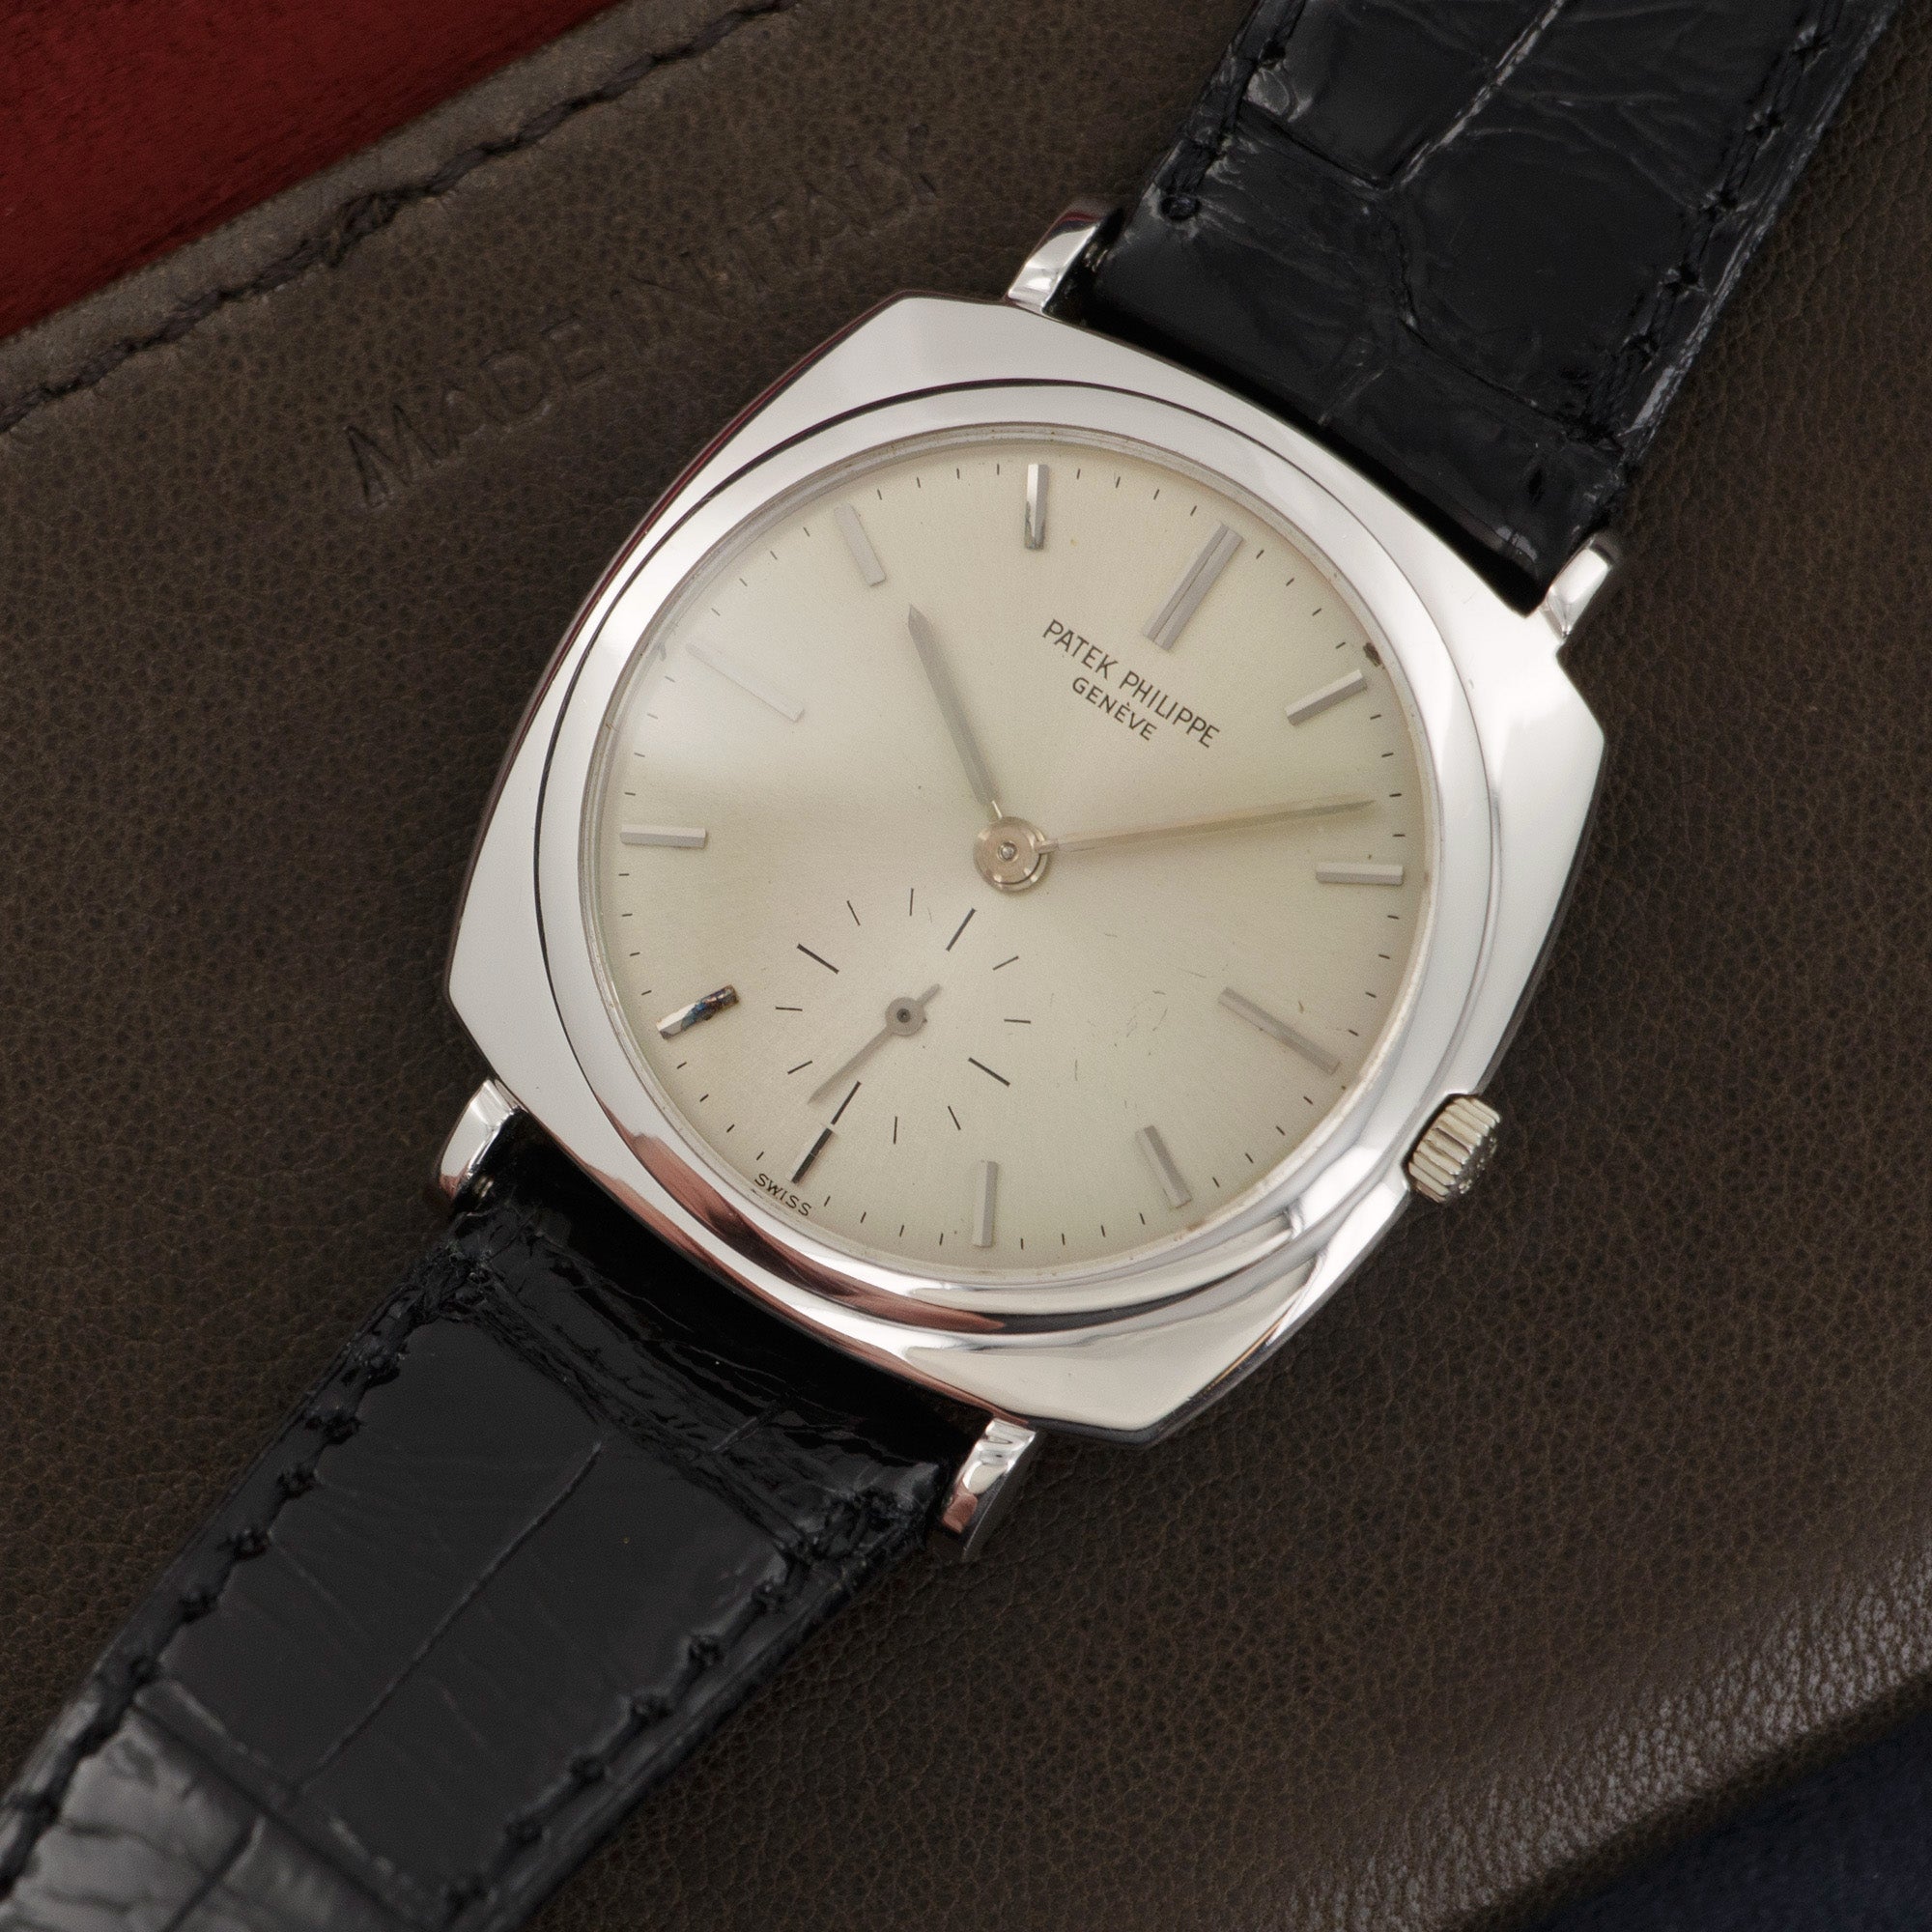 Patek Philippe White Gold Automatic Watch Ref. 3525